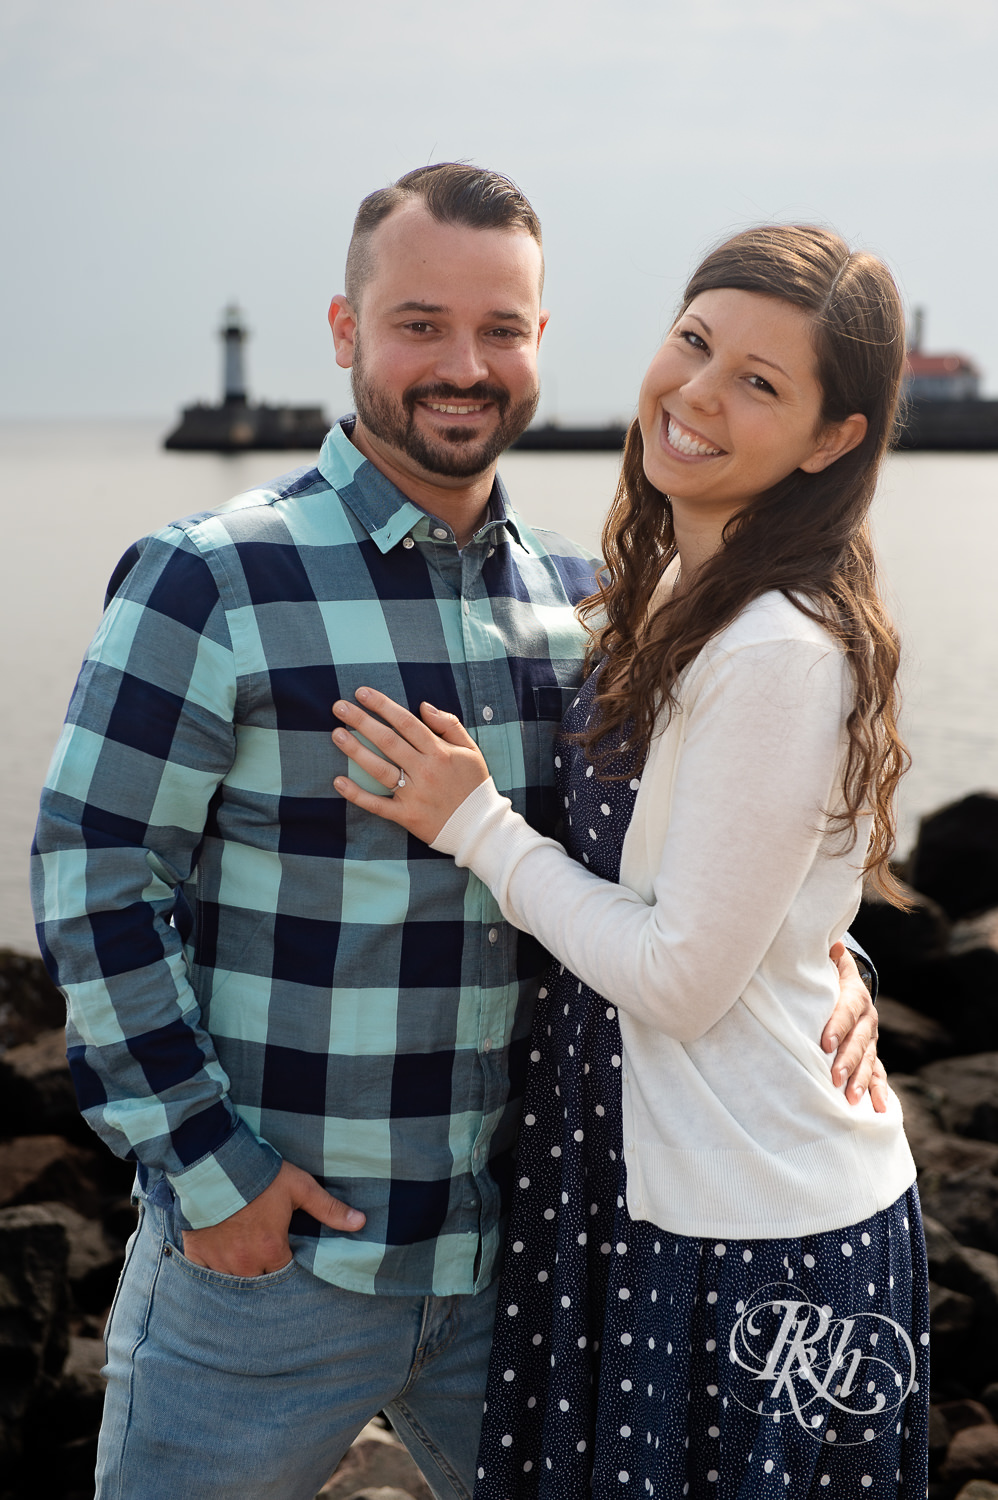 Man and woman smile with lighthouse in background during Canal Park engagement photos in Duluth, Minnesota.